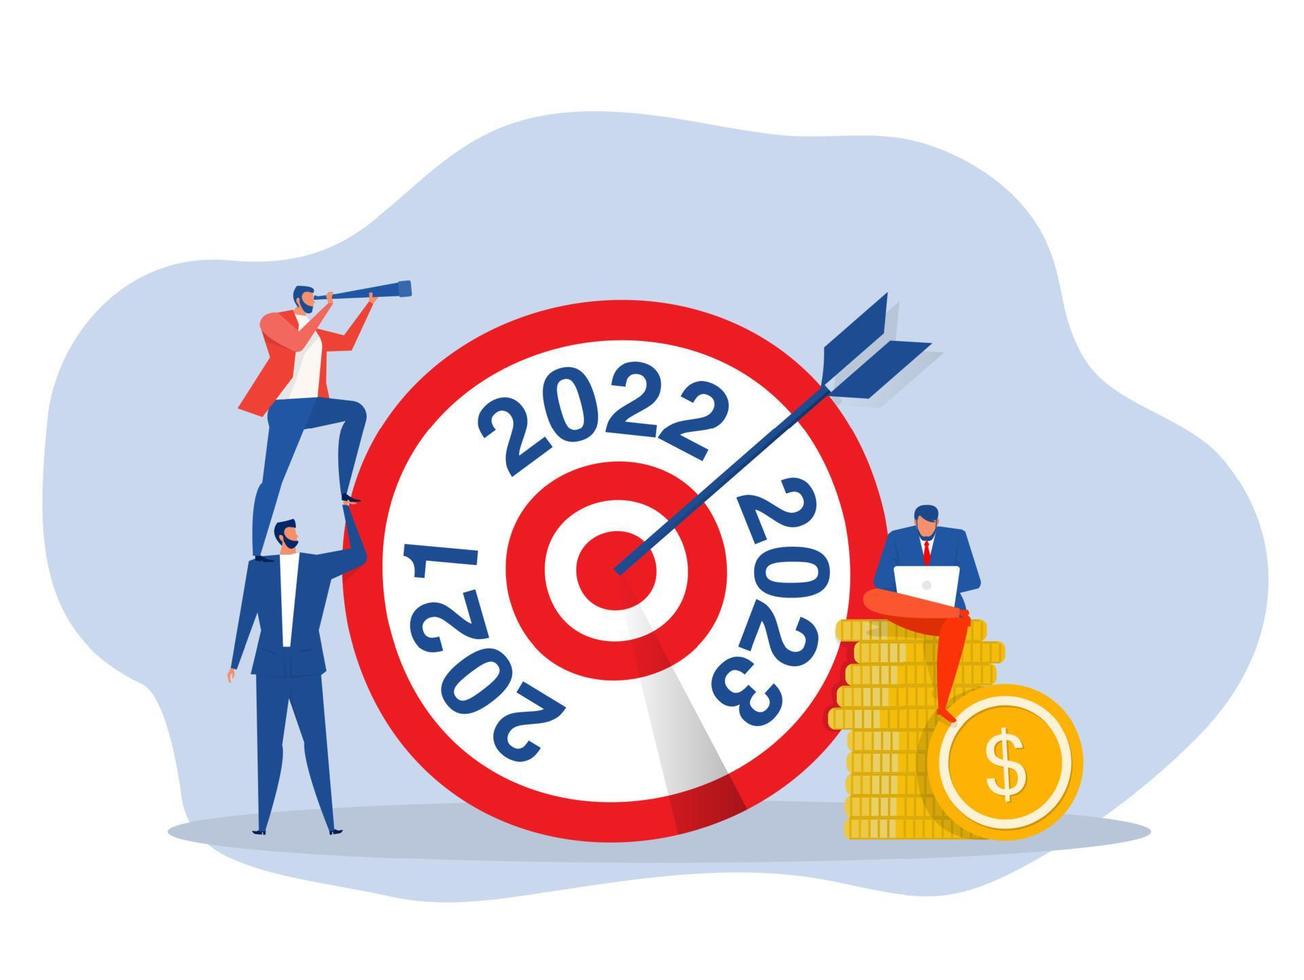 Future Goal And Plans.Year 2022 business target ,new year resolutions, success plan or career achievement concept, vector